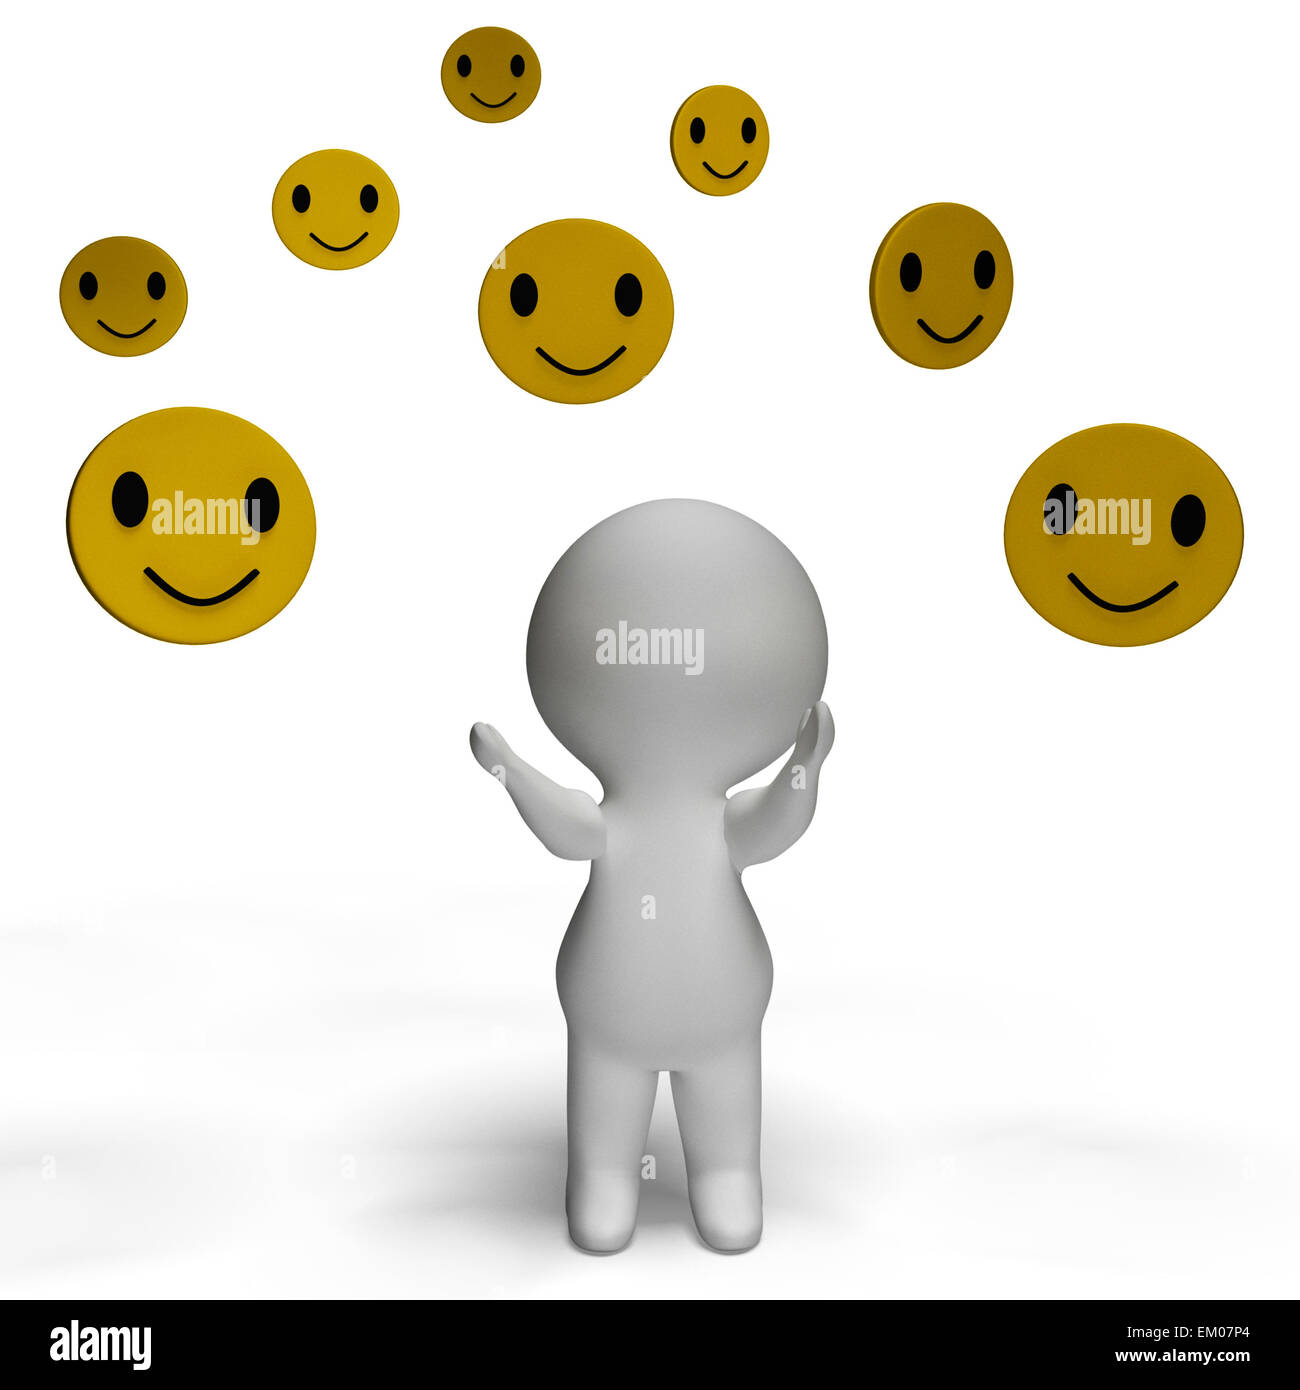 Smileys Smiling And 3d Character Shows Happiness Stock Photo